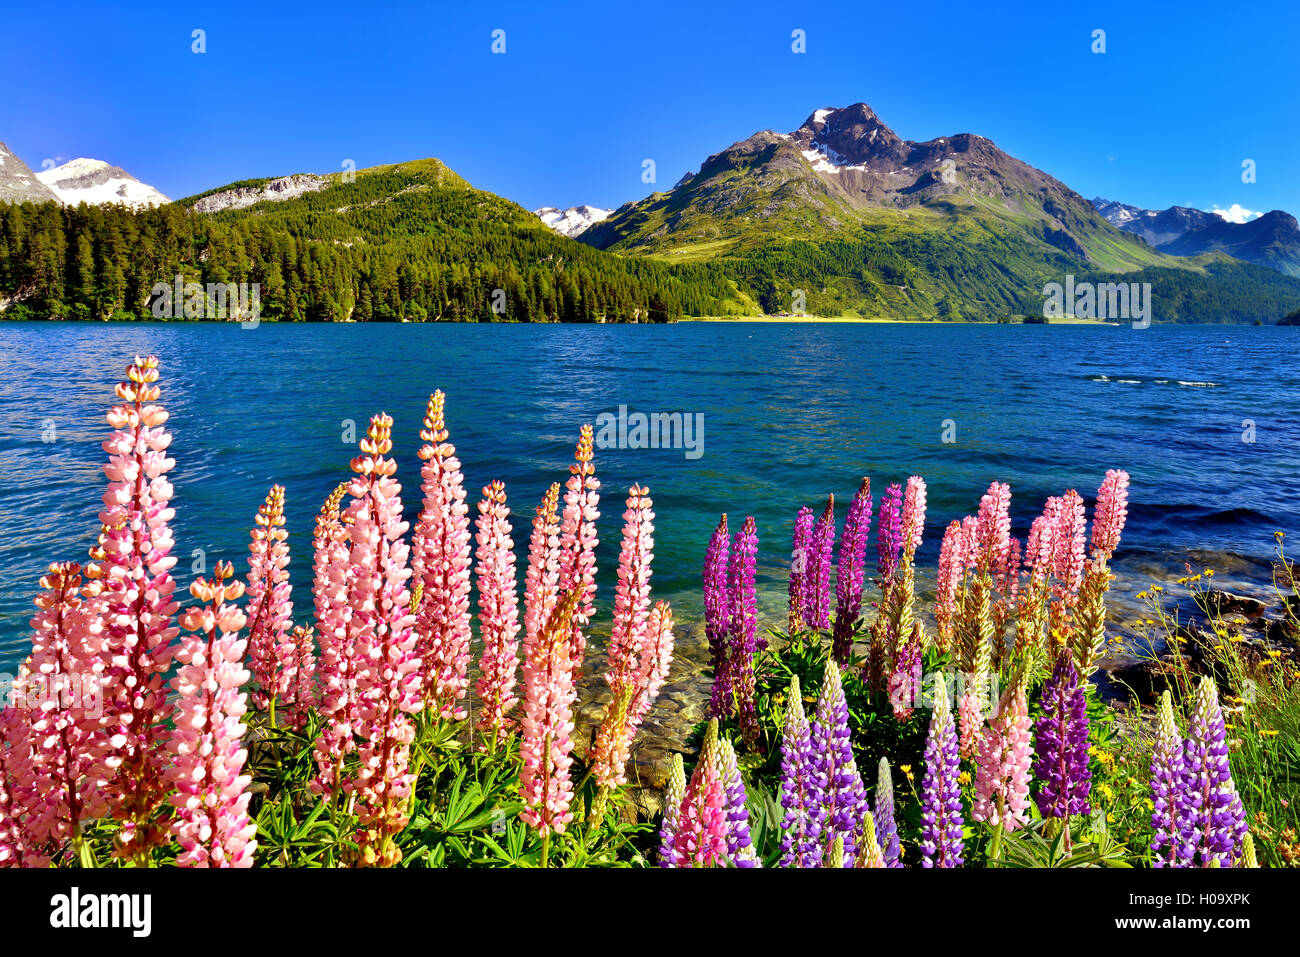 Blooming lupines (Lupinus) at Lake Sils with Piz da la Margna, Engadin, Canton of Grisons, Switzerland Stock Photo